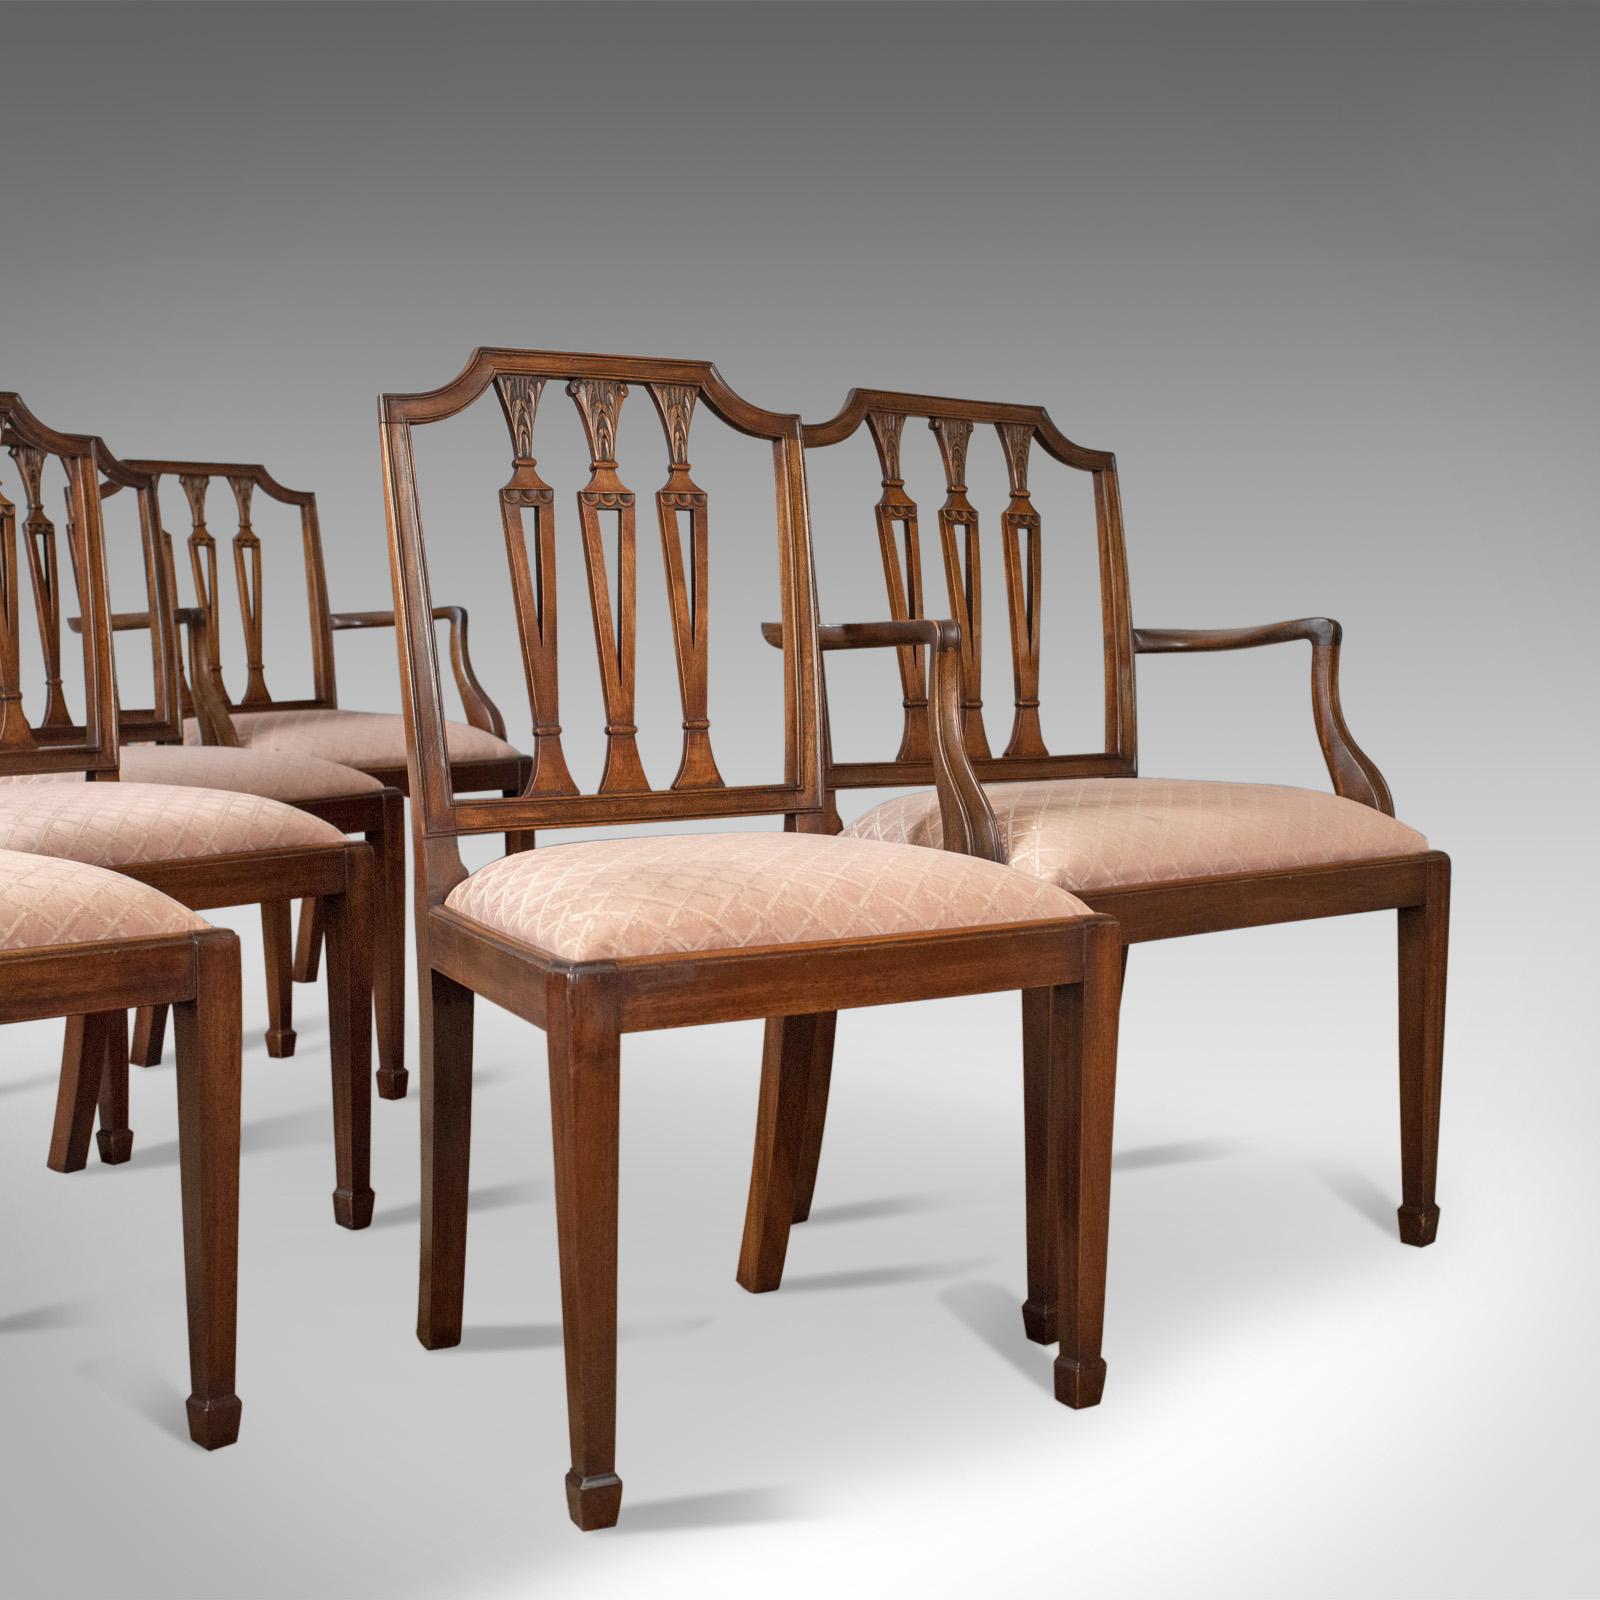 This is a set of six antique dining chairs in mahogany, Victorian Sheraton Revival, English, circa 1900. 

An attractive set of six, English, late 19th century dining chairs
In the desirable form of a pair of carver elbow chairs and four